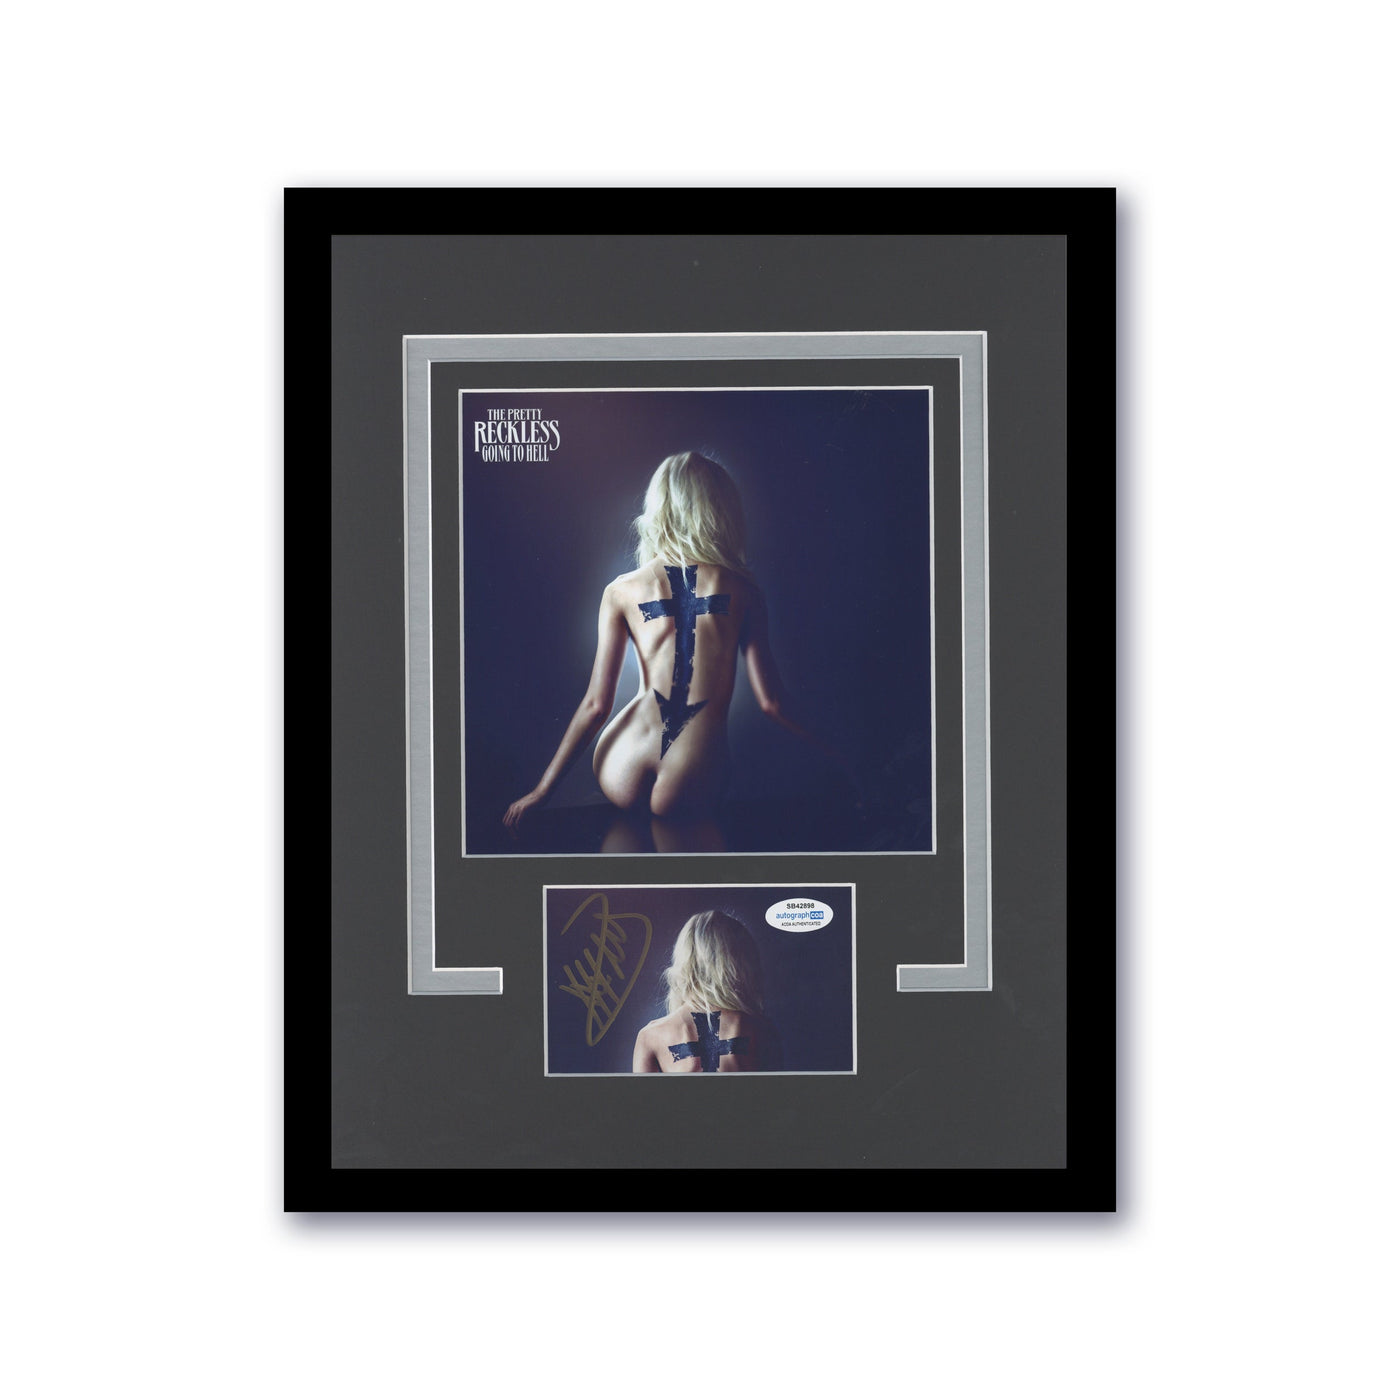 Taylor Momsen Autographed 11x14 Framed Photo Going To Hell Pretty Reckless ACOA